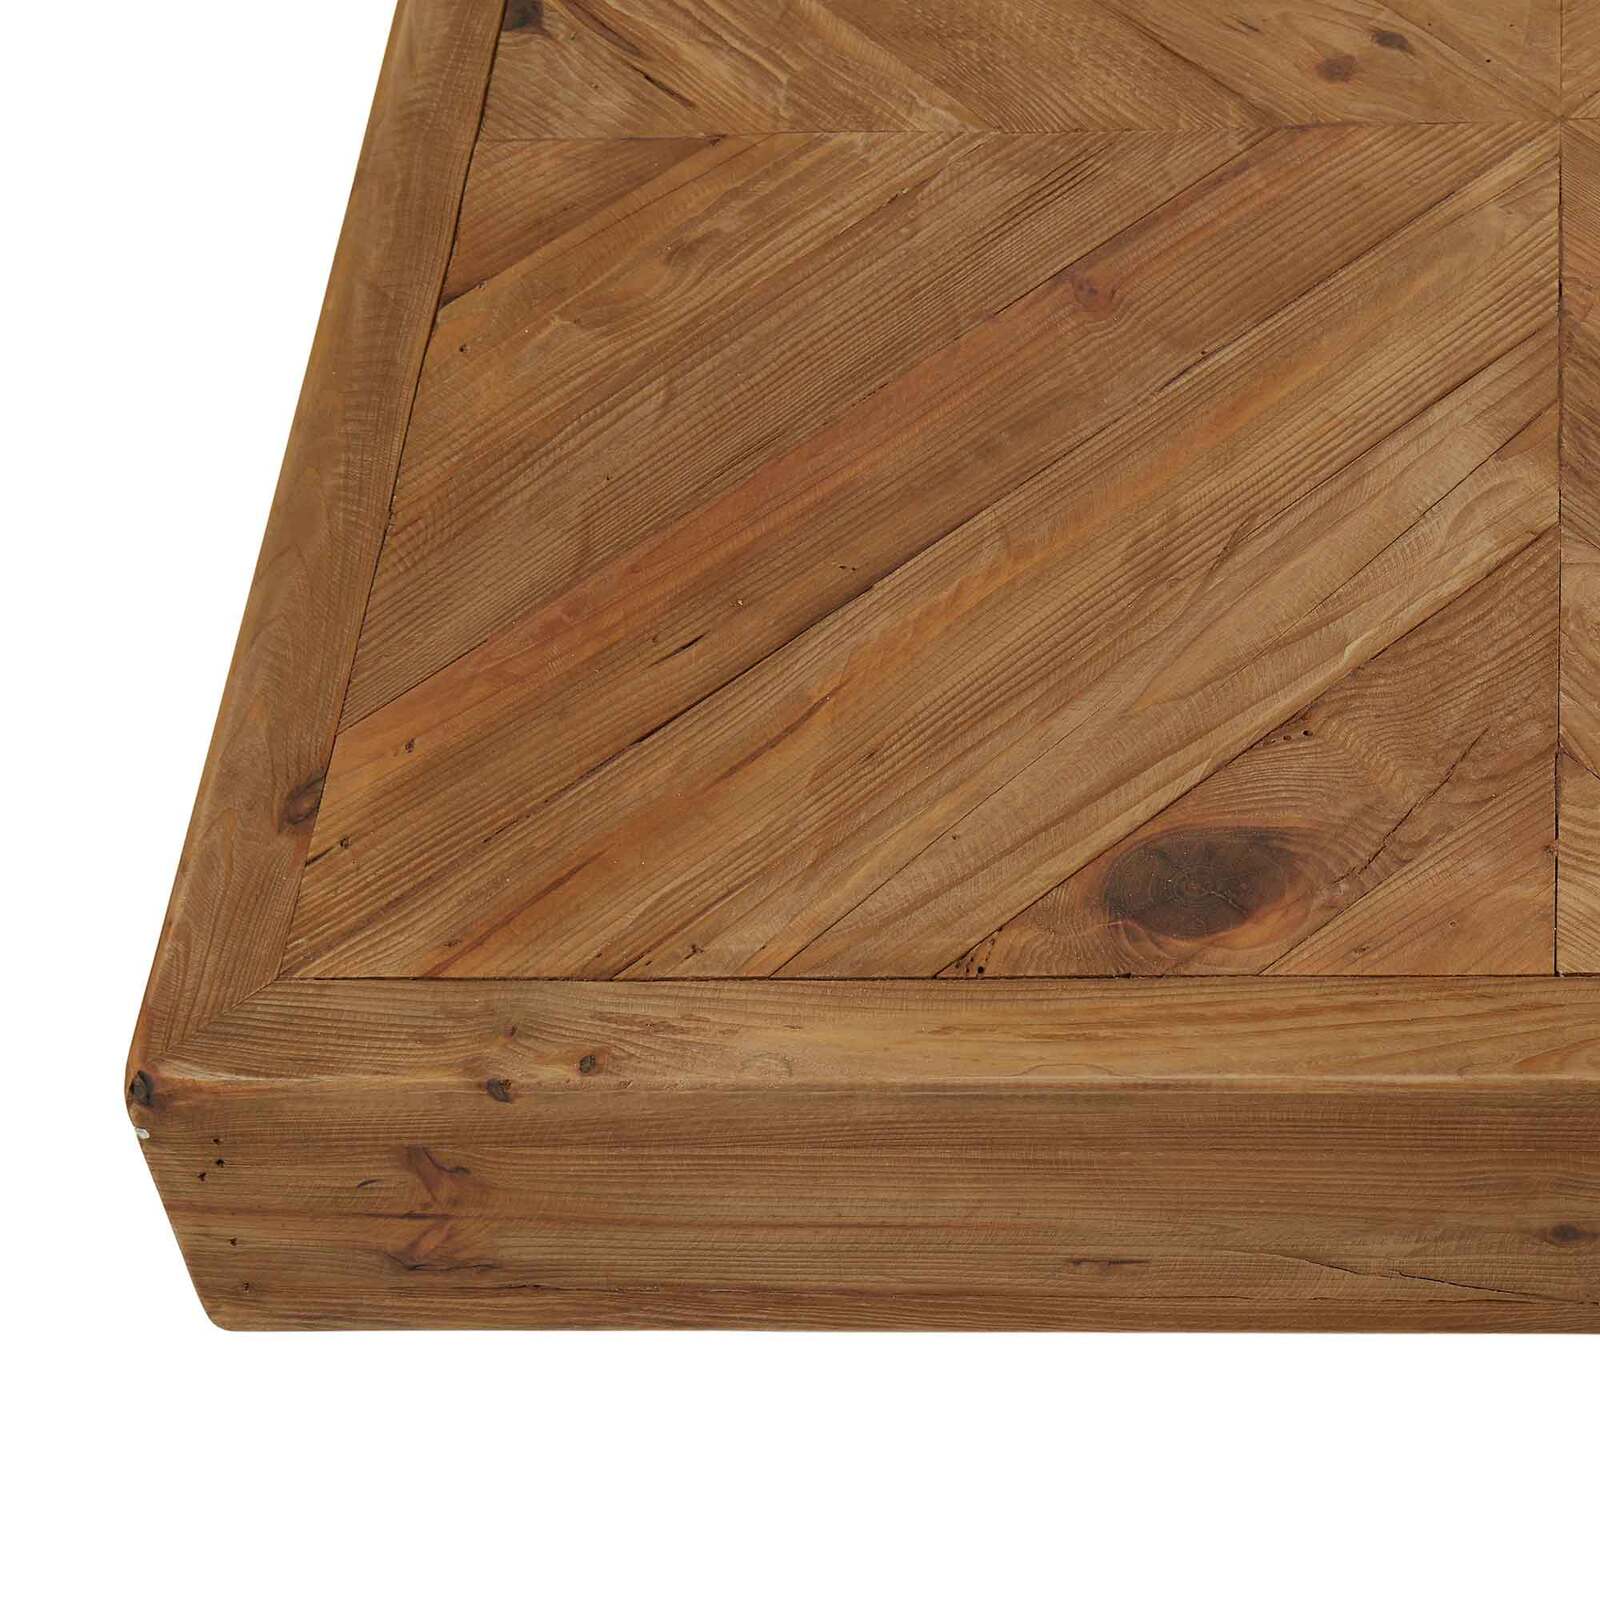 Elroi Reclaimed Pine Wood Square Coffee Table